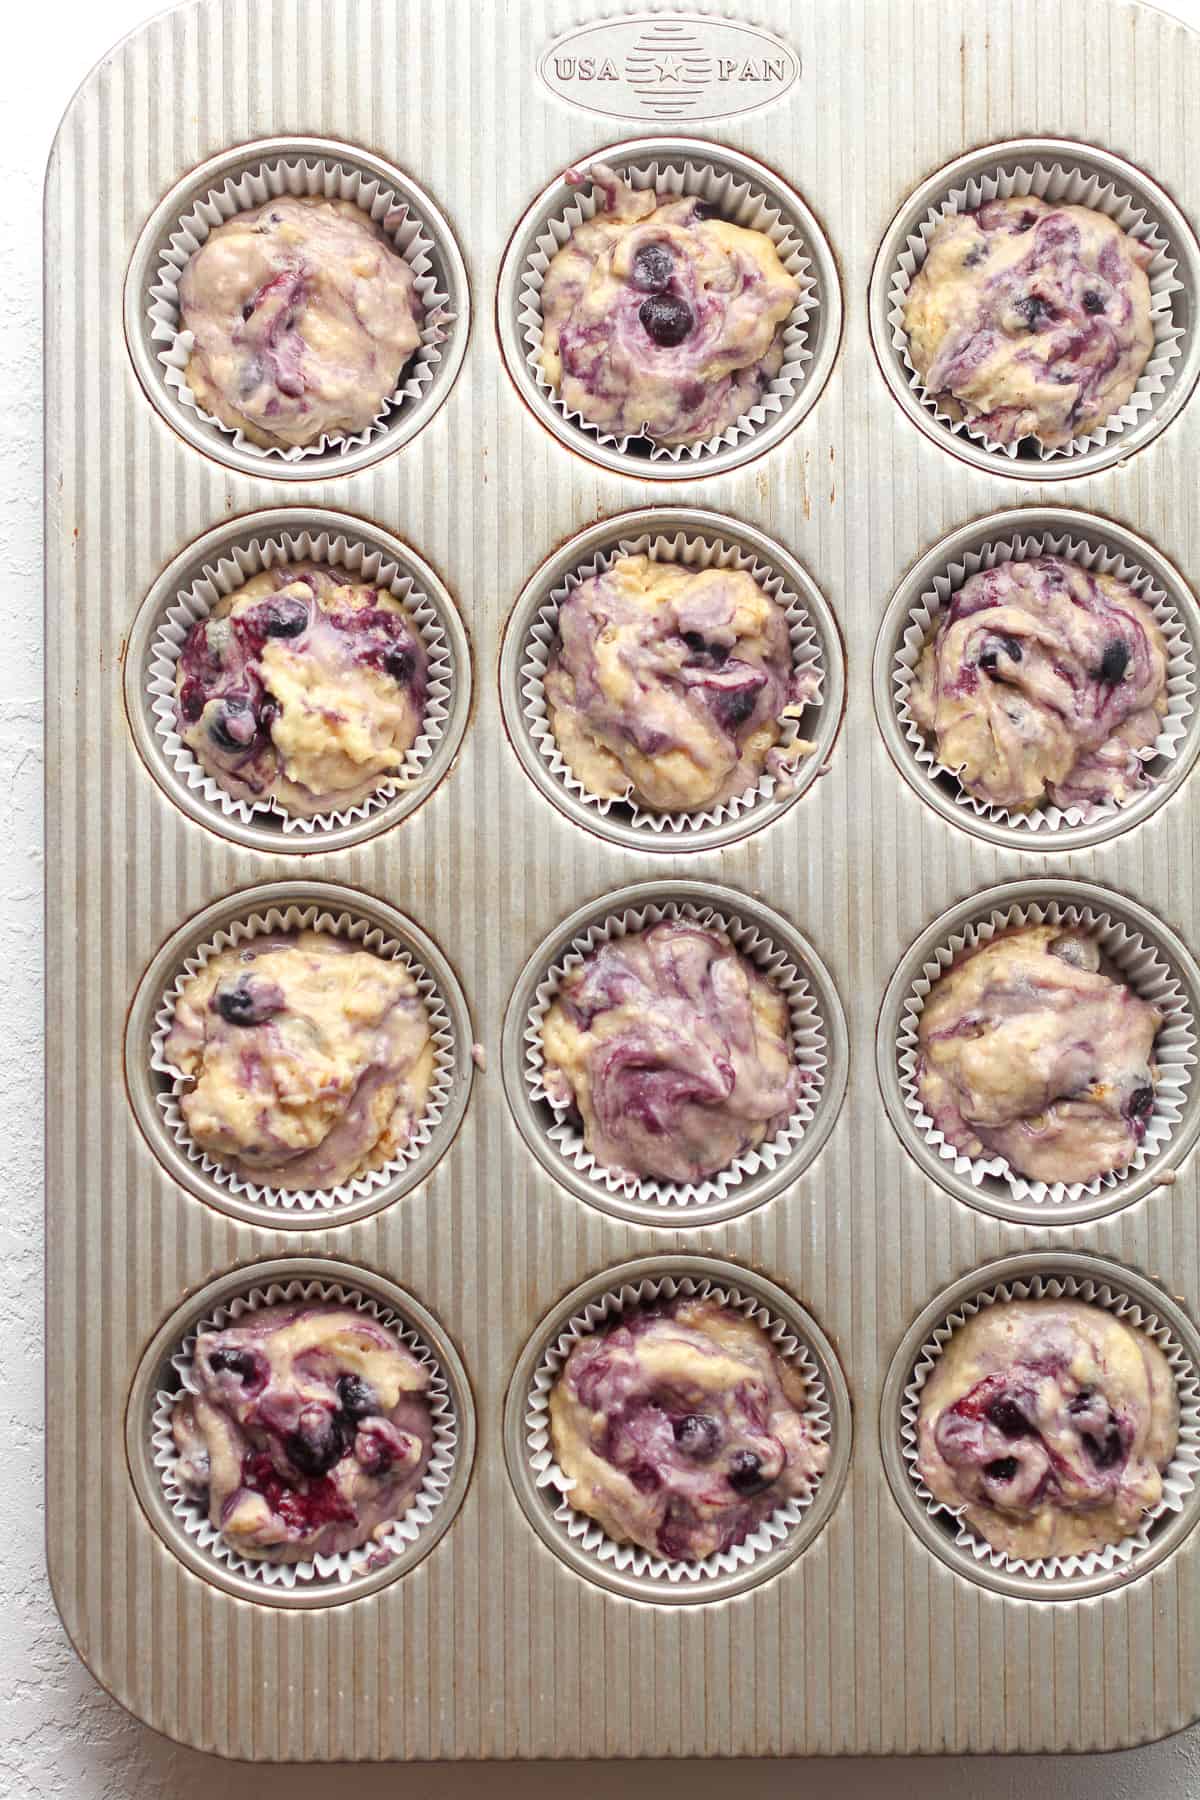 The muffin batter in a muffin tin.